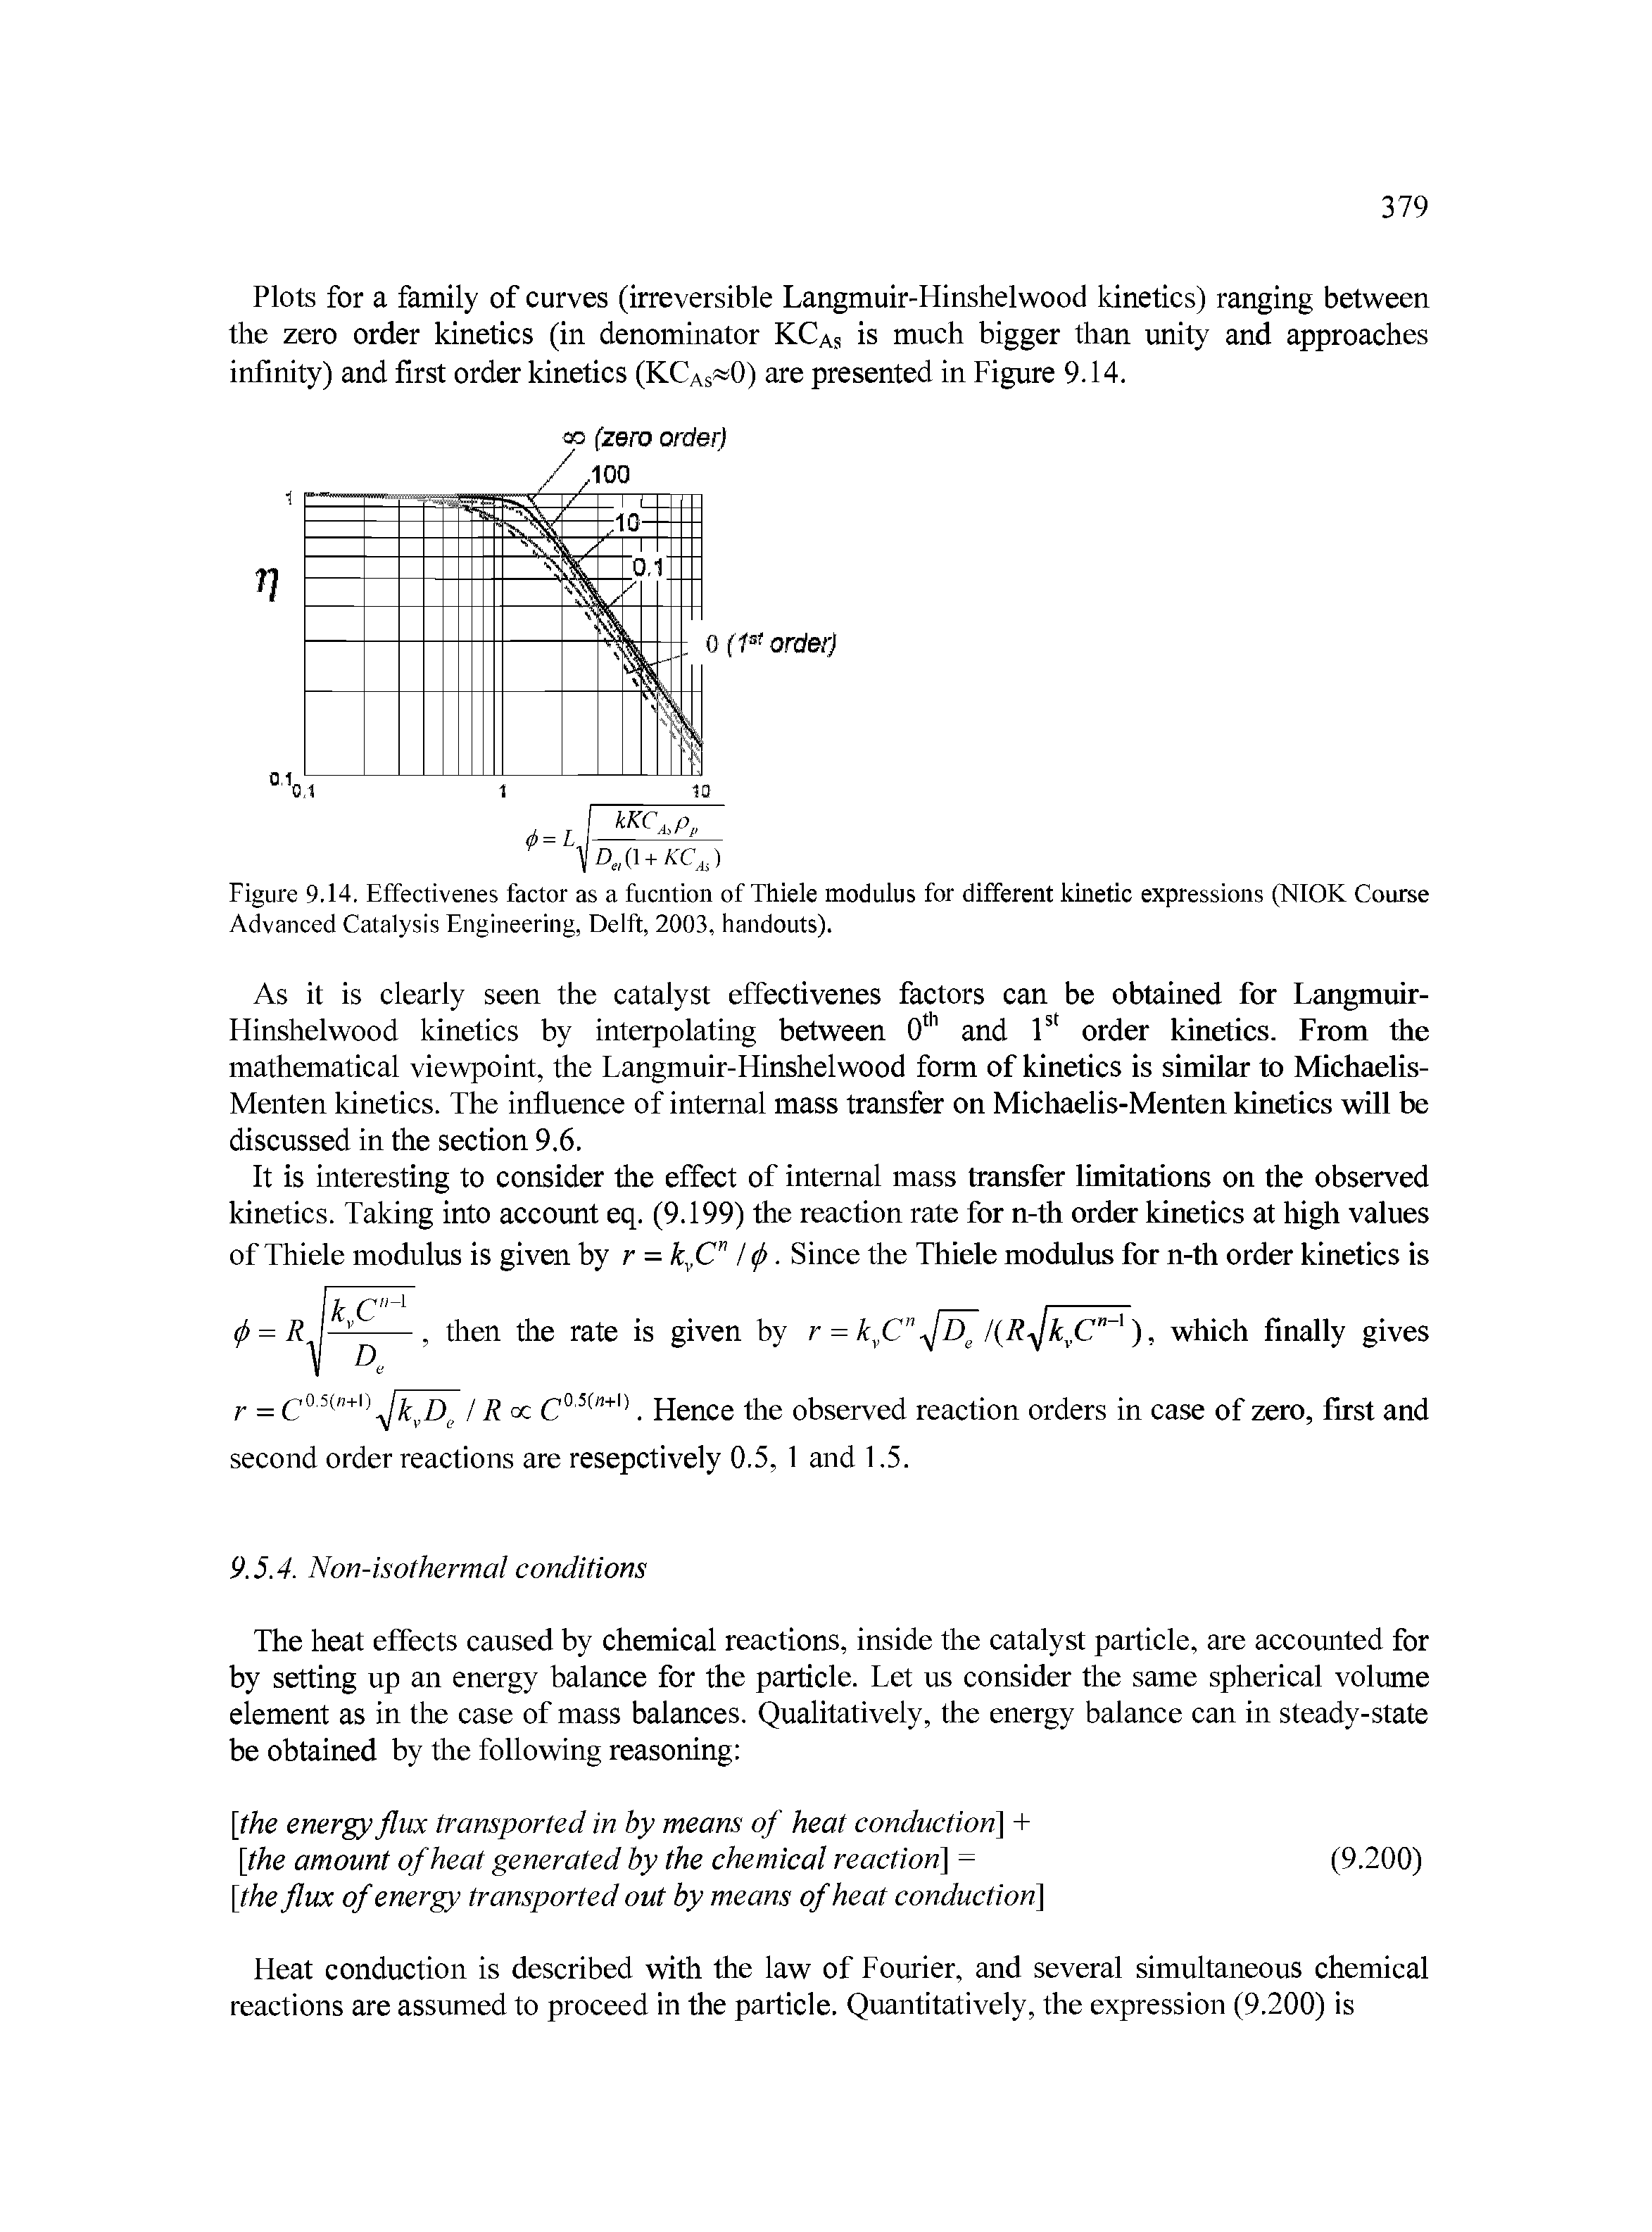 Figure 9.14. Effectivenes factor as a fucntion of Thiele modulus for different kinetic expressions (NIOK Course Advanced Catalysis Engineering, Delft, 2003, handouts).